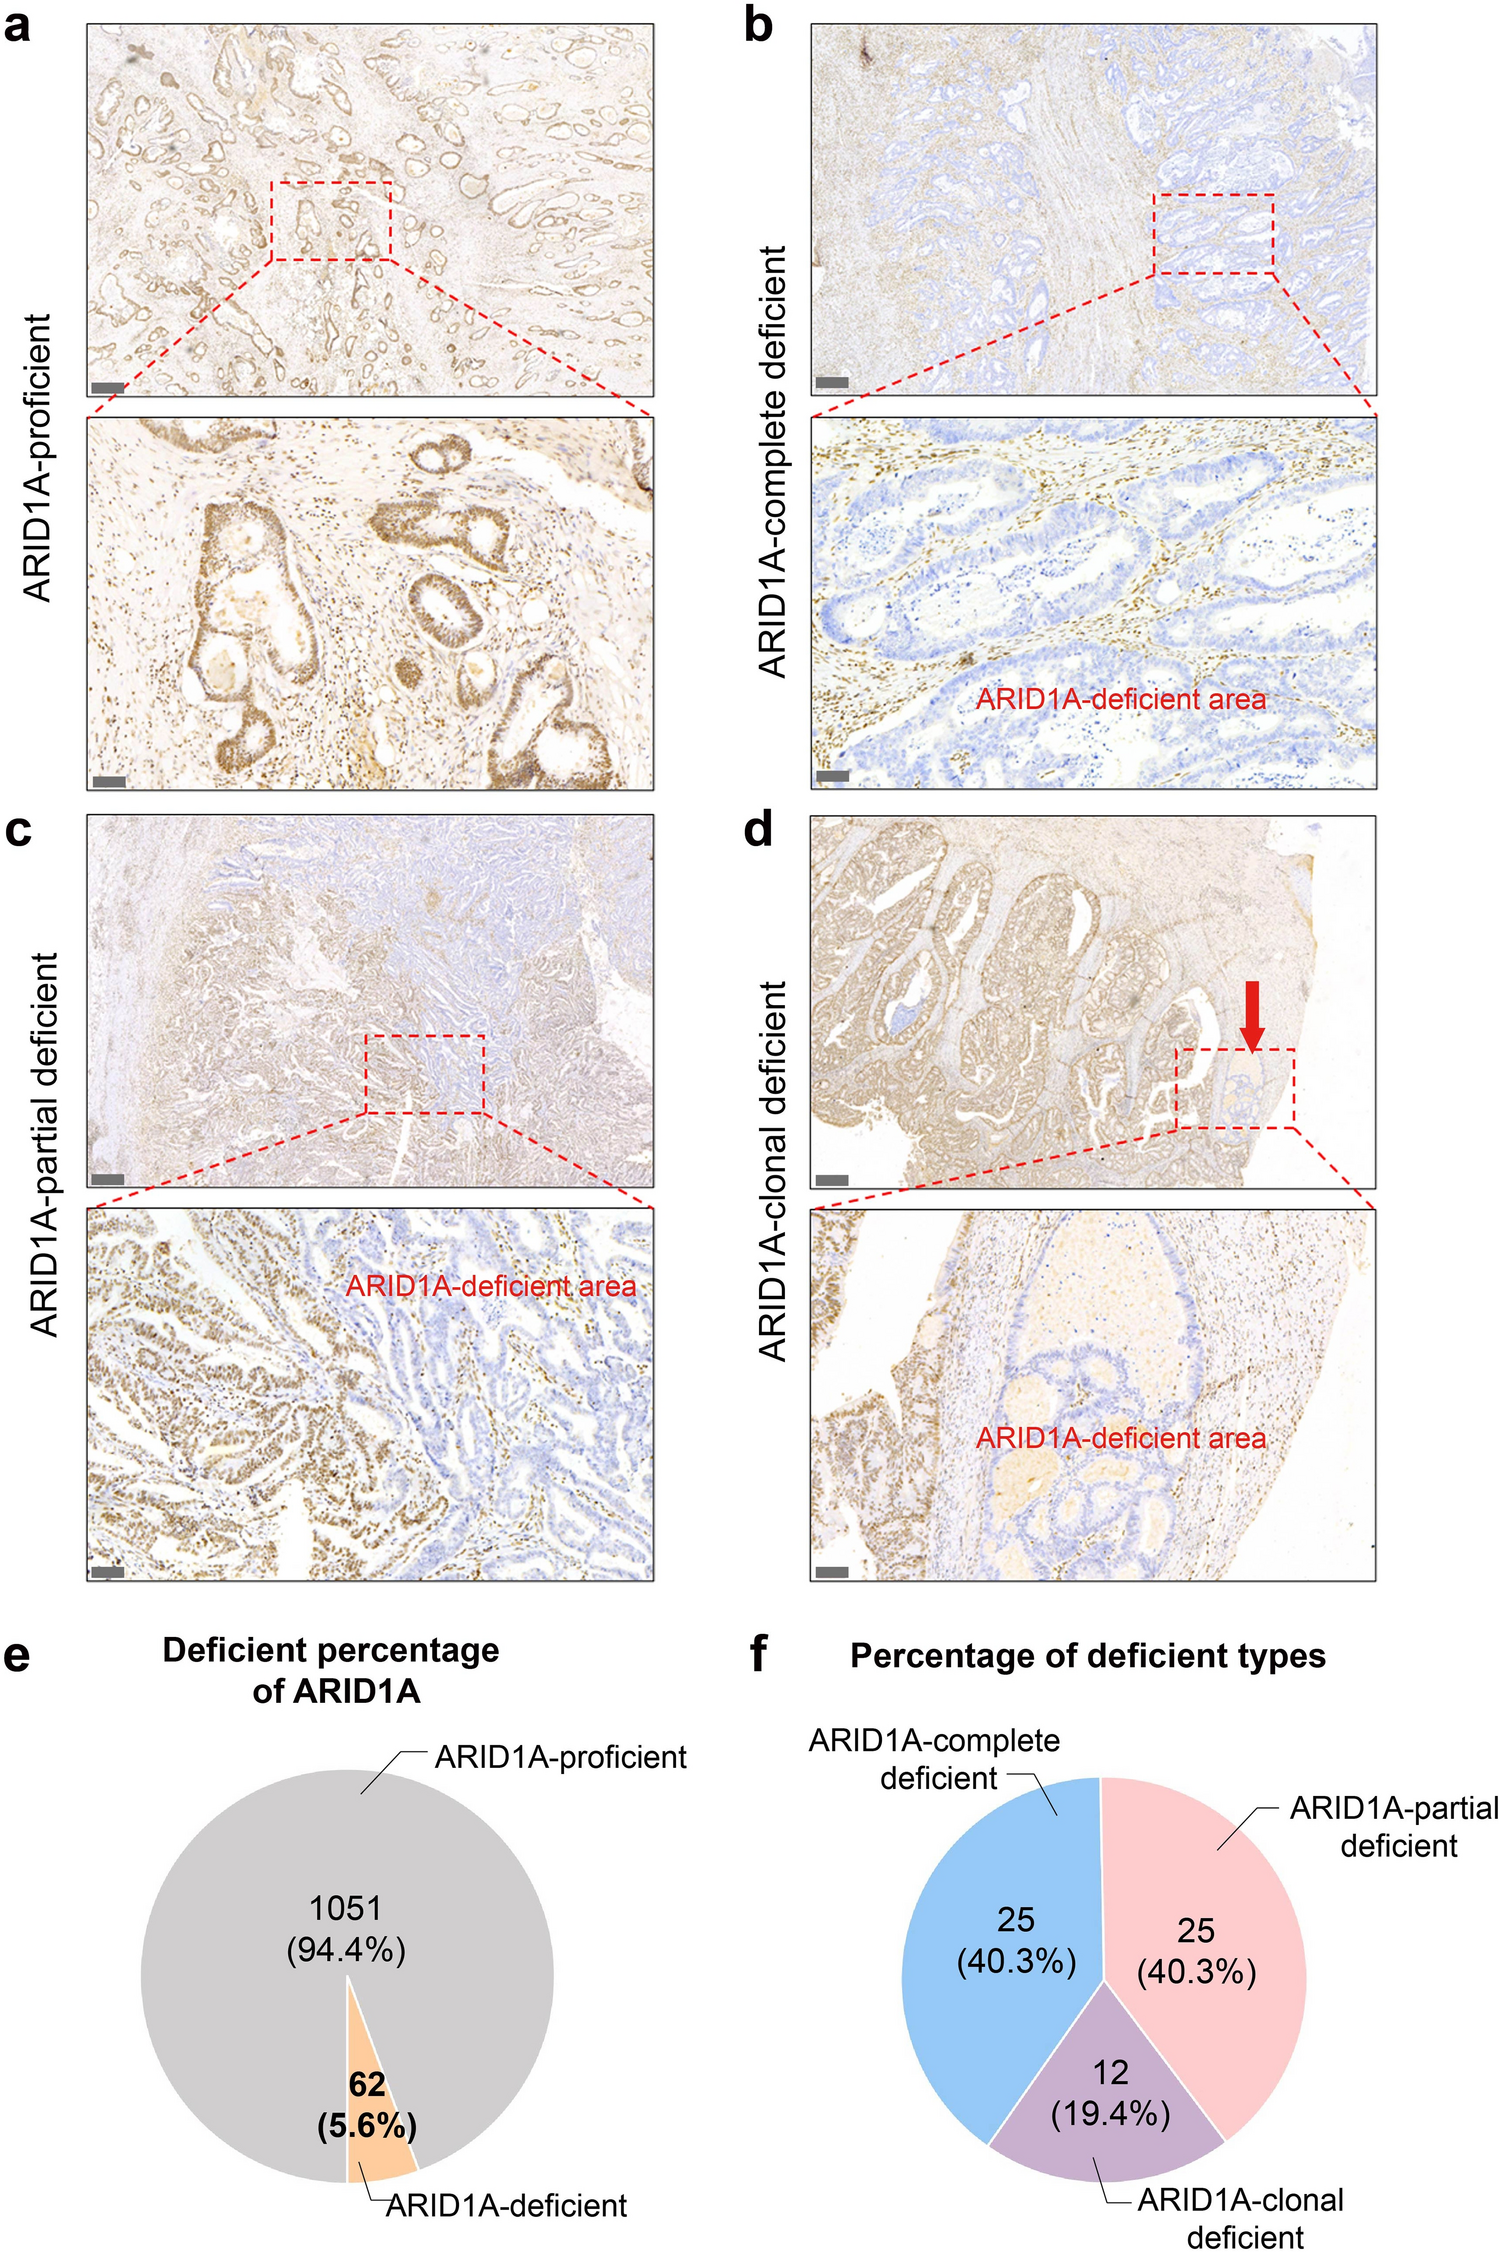 Heterogeneous expression of ARID1A in colorectal cancer indicates distinguish immune landscape and efficacy of immunotherapy